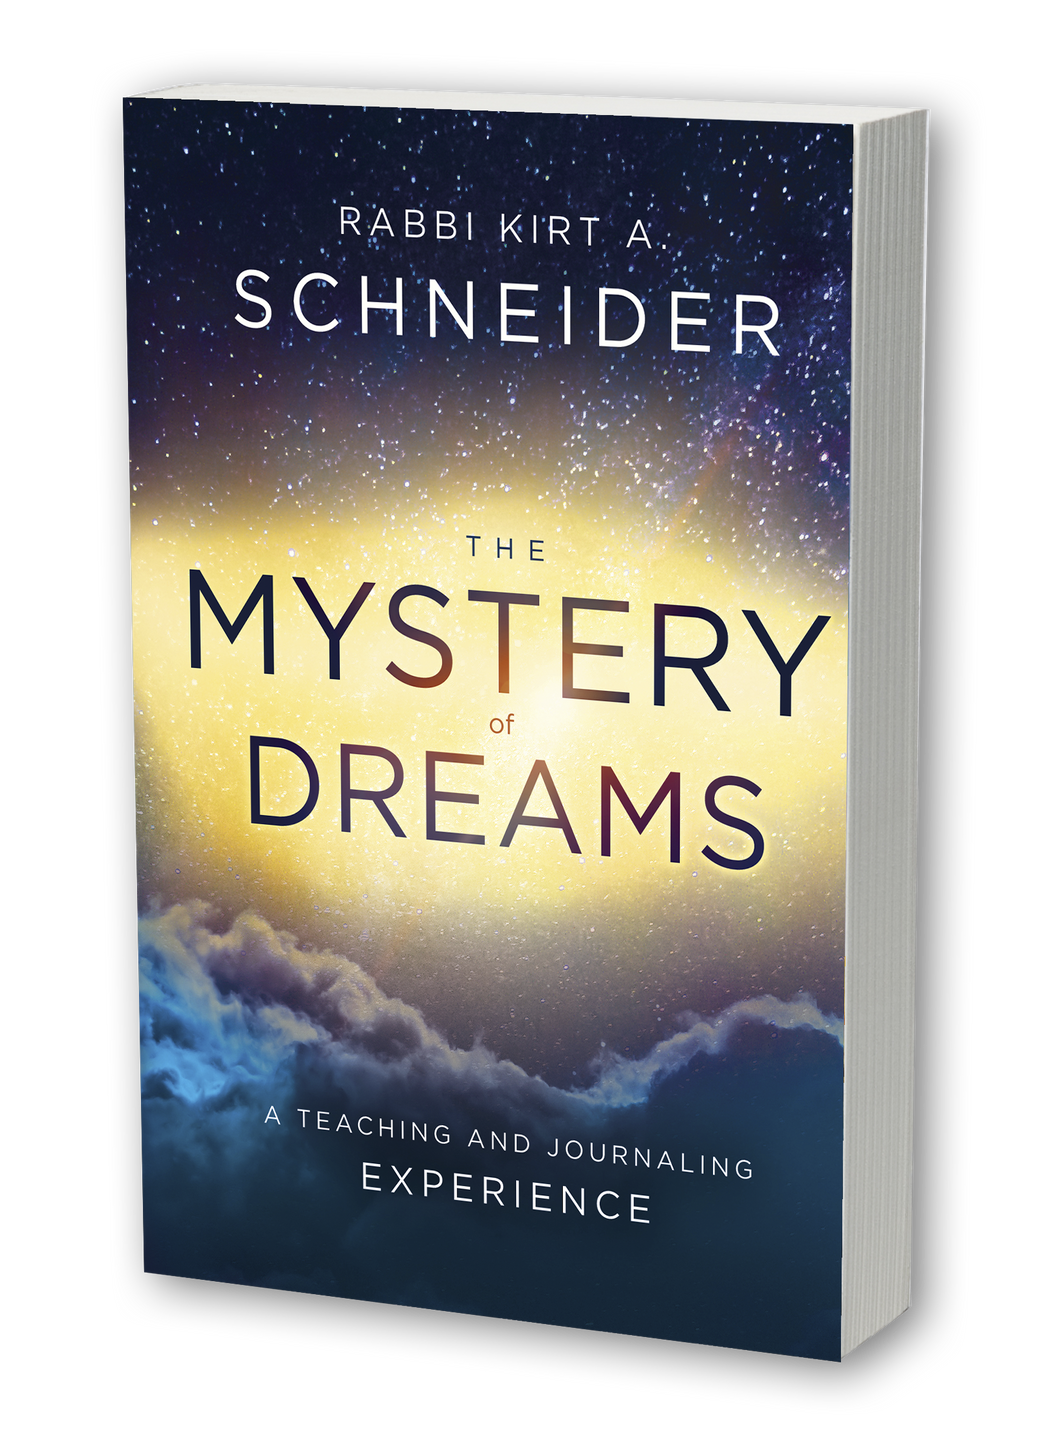 The Mystery of Dreams: A Teaching and Journaling Experience (Hardcover)